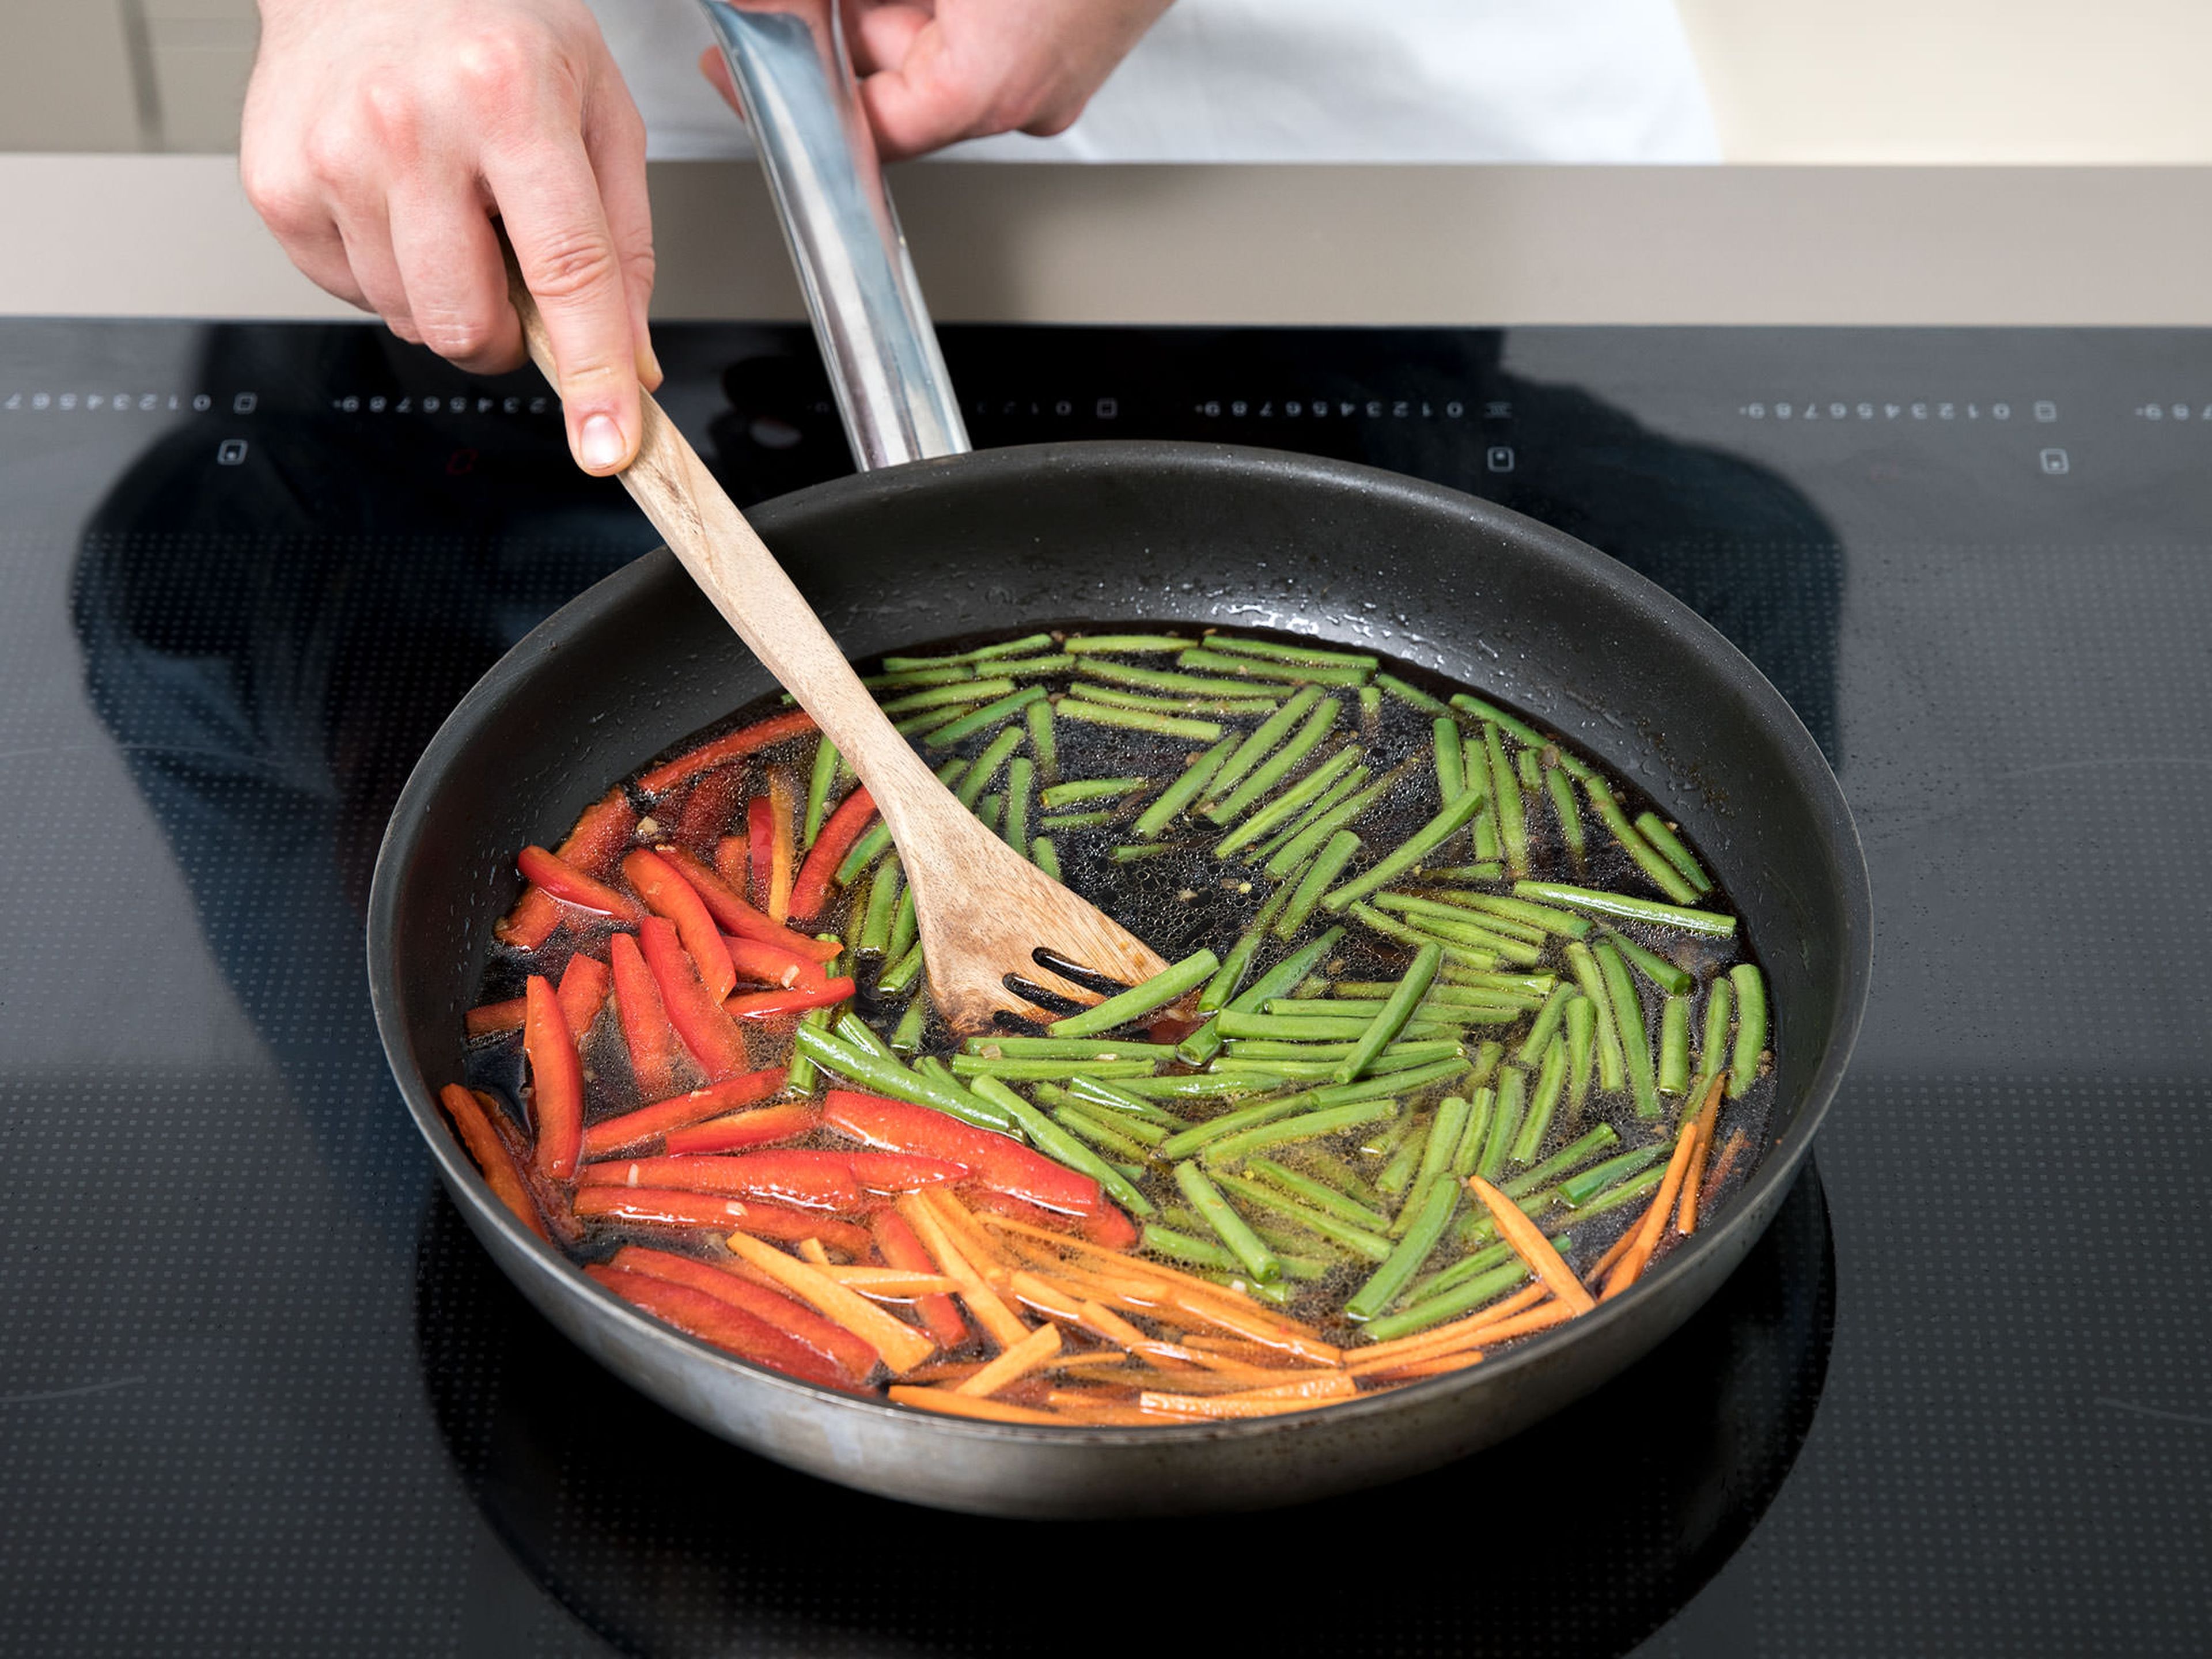 Pour water into the wok and bring to a boil. Add all of the vegetables and cook on high heat for approx. 3 min. Then add the chicken and continue to simmer for approx. 5 min. Thicken sauce with starch, if necessary.